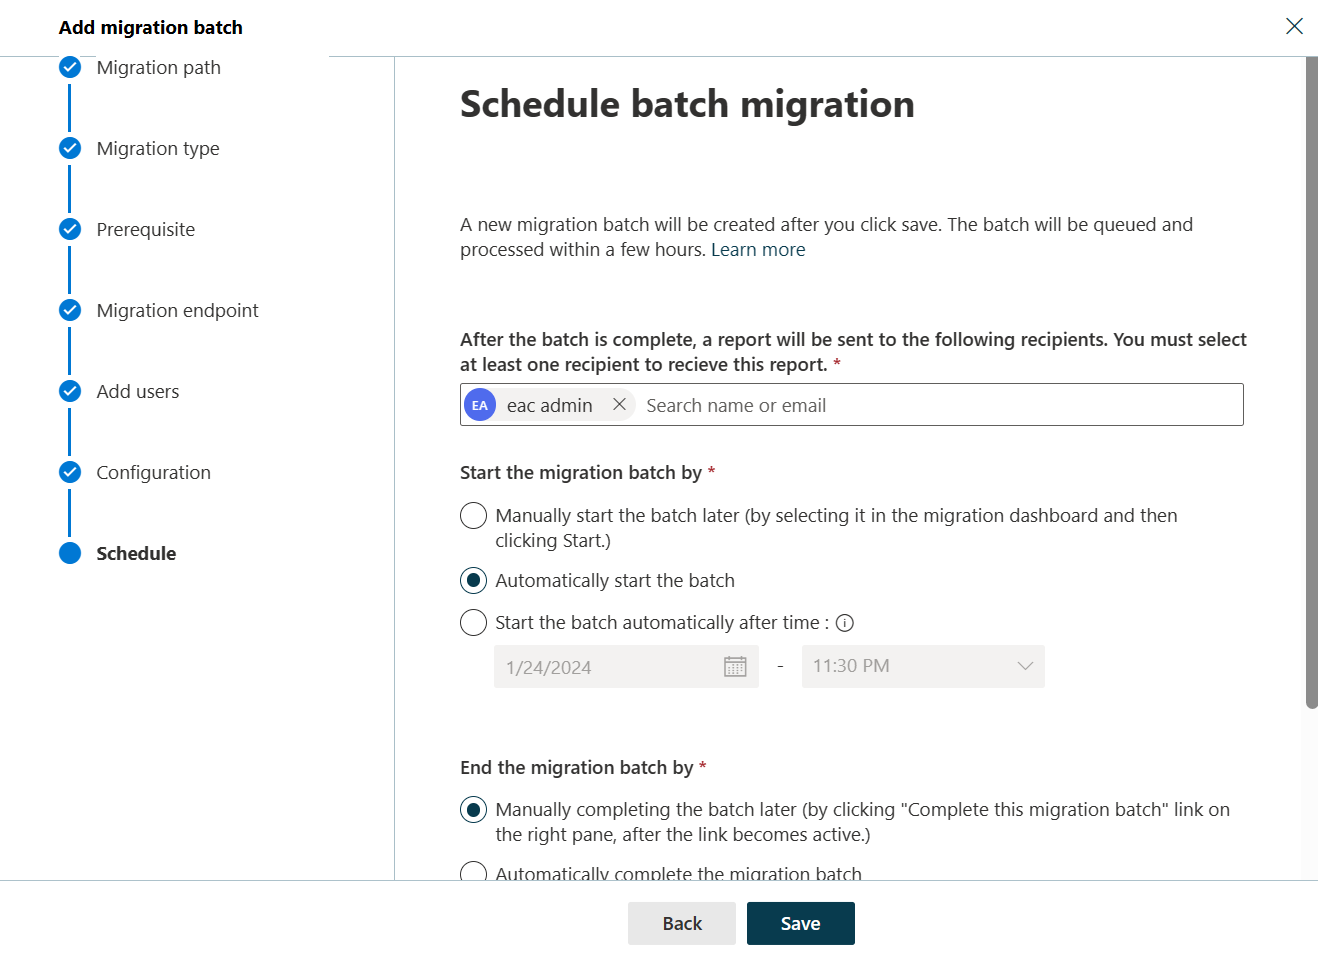 Screenshot of Schedule migration batch that gives the user the ability to list a recipient to notify, specify migration start and end times. eac_admin is listed as the user to notify and the migration start is set to automatically start. Migration batch end time is set to manually complete.